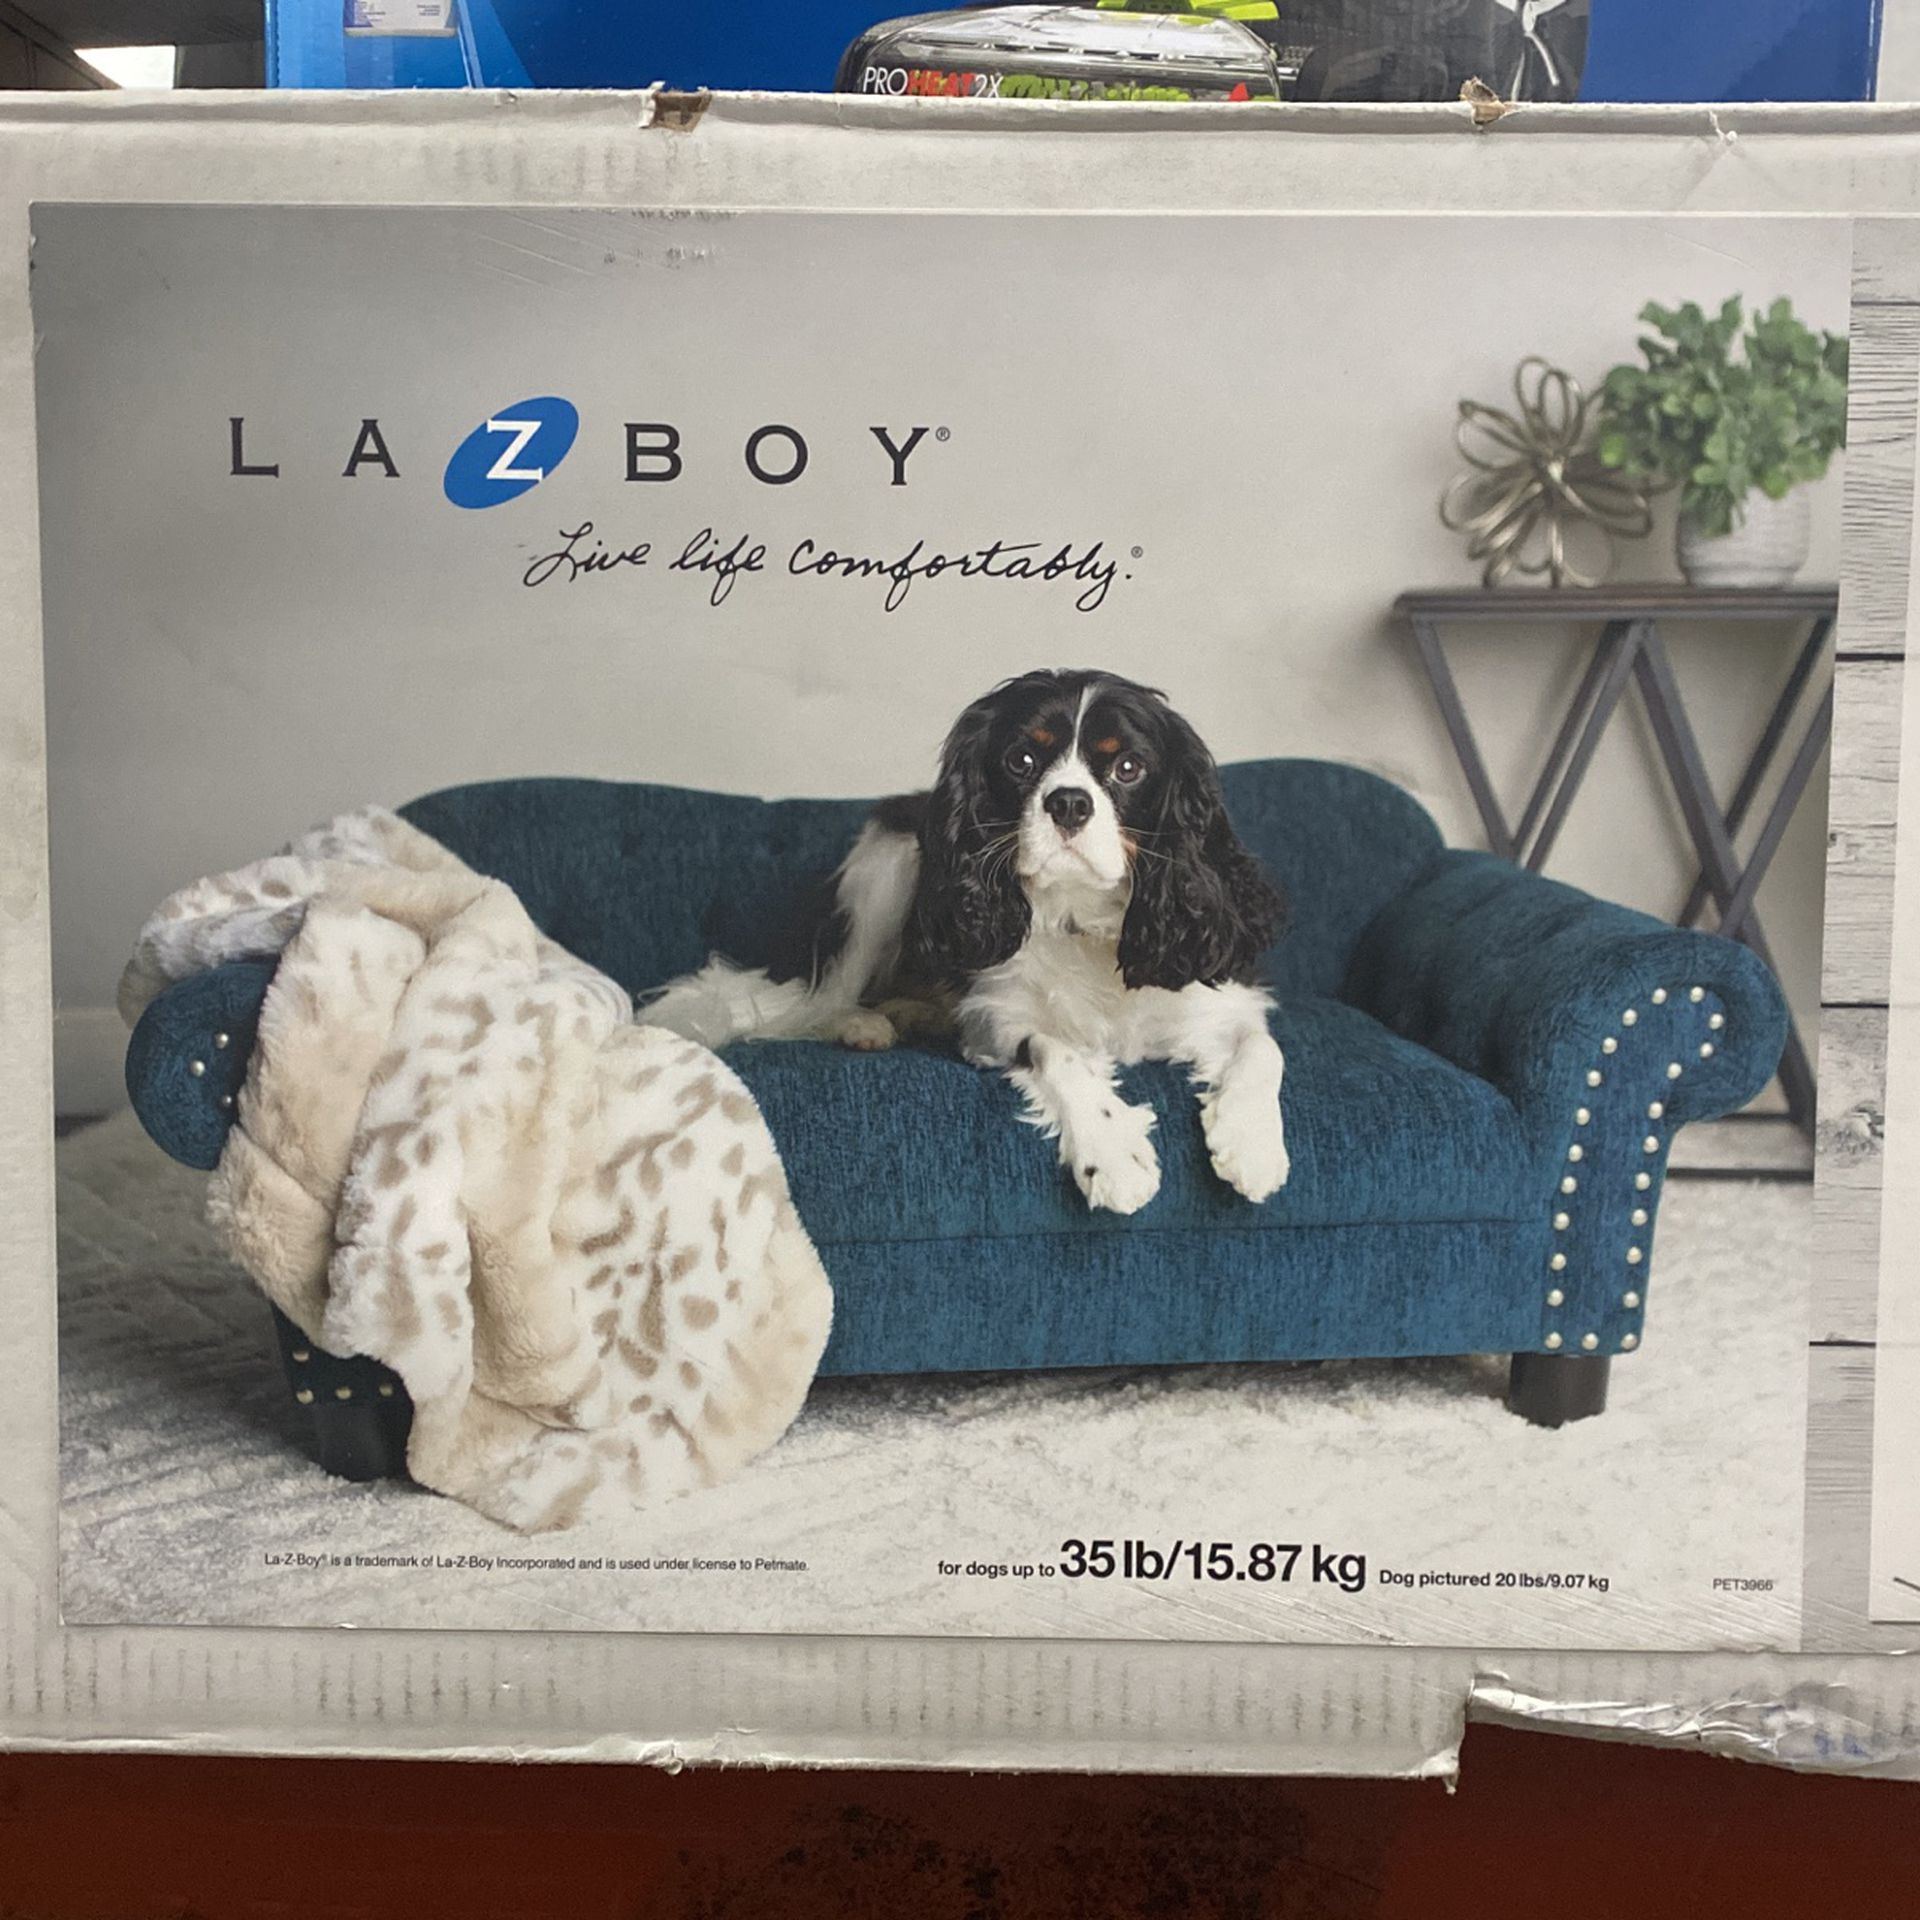 Lazboy Dog Bed - Couch